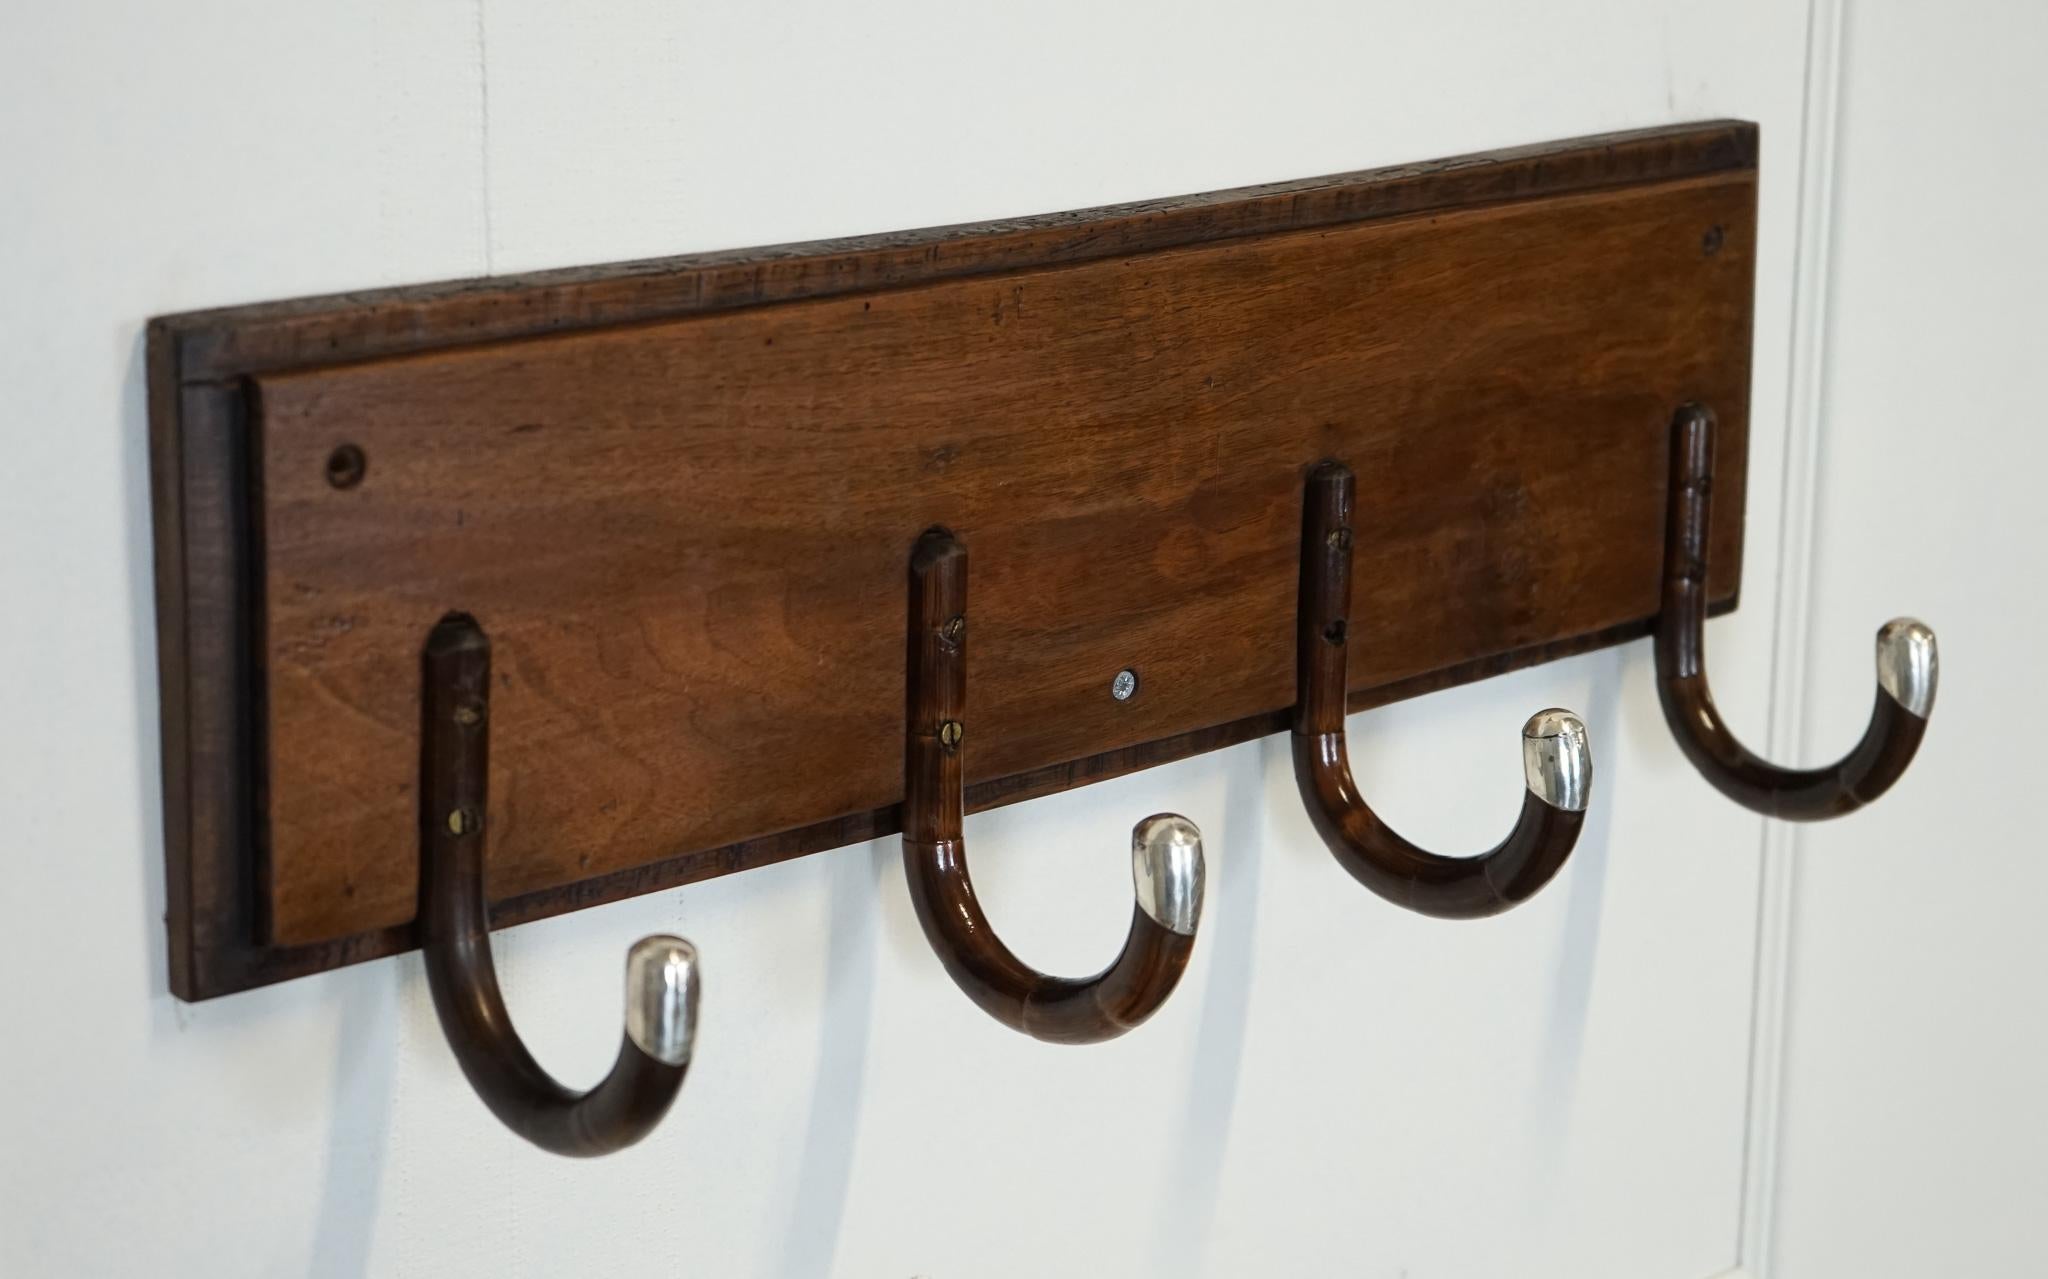 
We are delighted to offer for sale This rare custom-made Art Deco hat coat wall rack from the 1920s.

 A striking and highly collectible piece. It is made from four canes, adding to its unique and artisanal appeal. The wall rack was created in